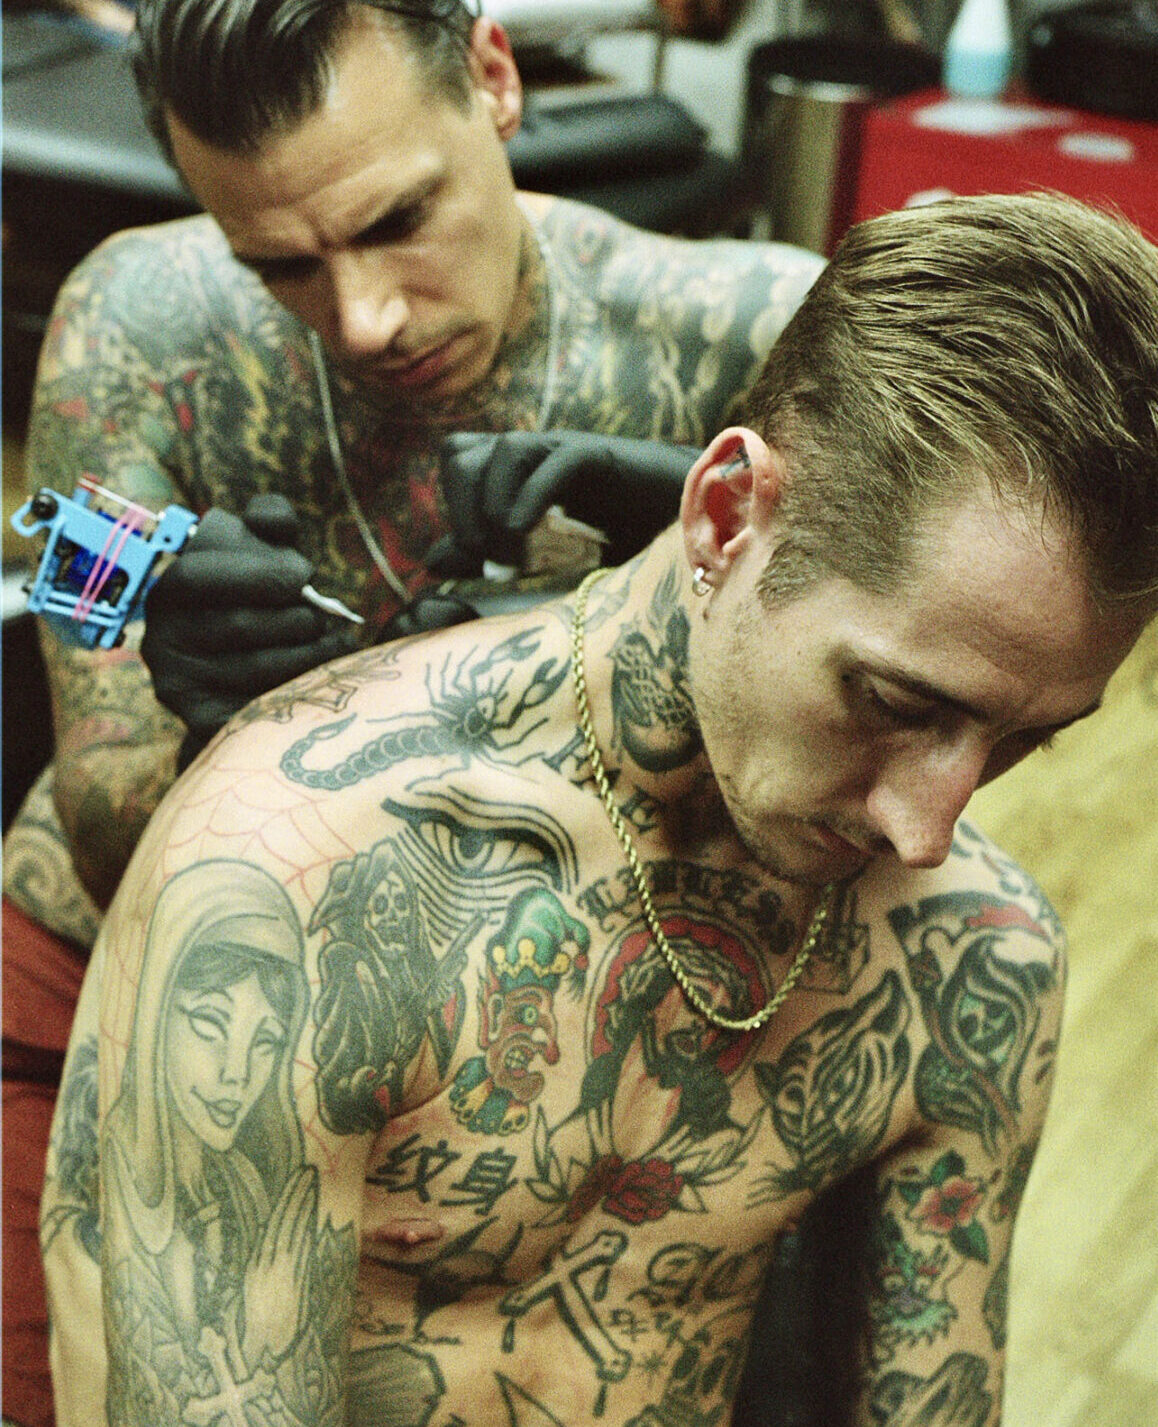 The daily shop life of Frith Street Tattoo captured by Sylwia Swiderska - Tattoo Life